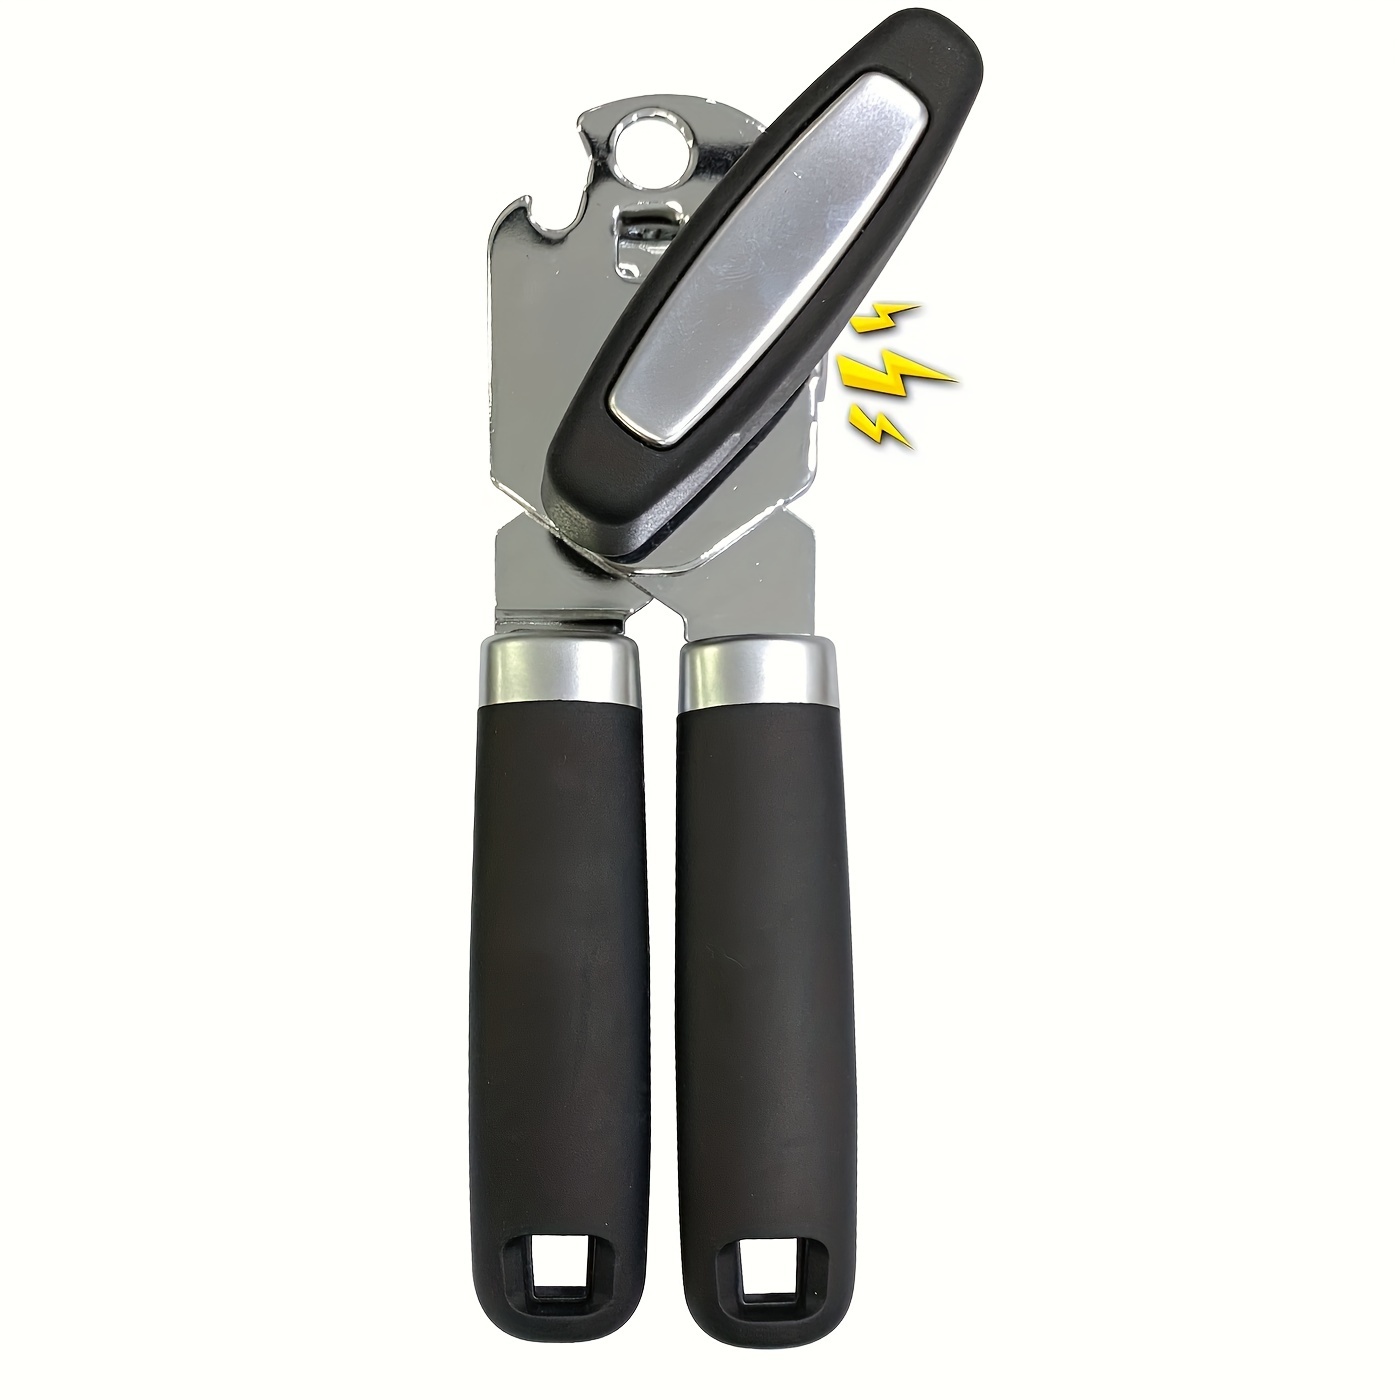 Can Opener, Kitchen Stainless Steel Heavy Duty Can Opener